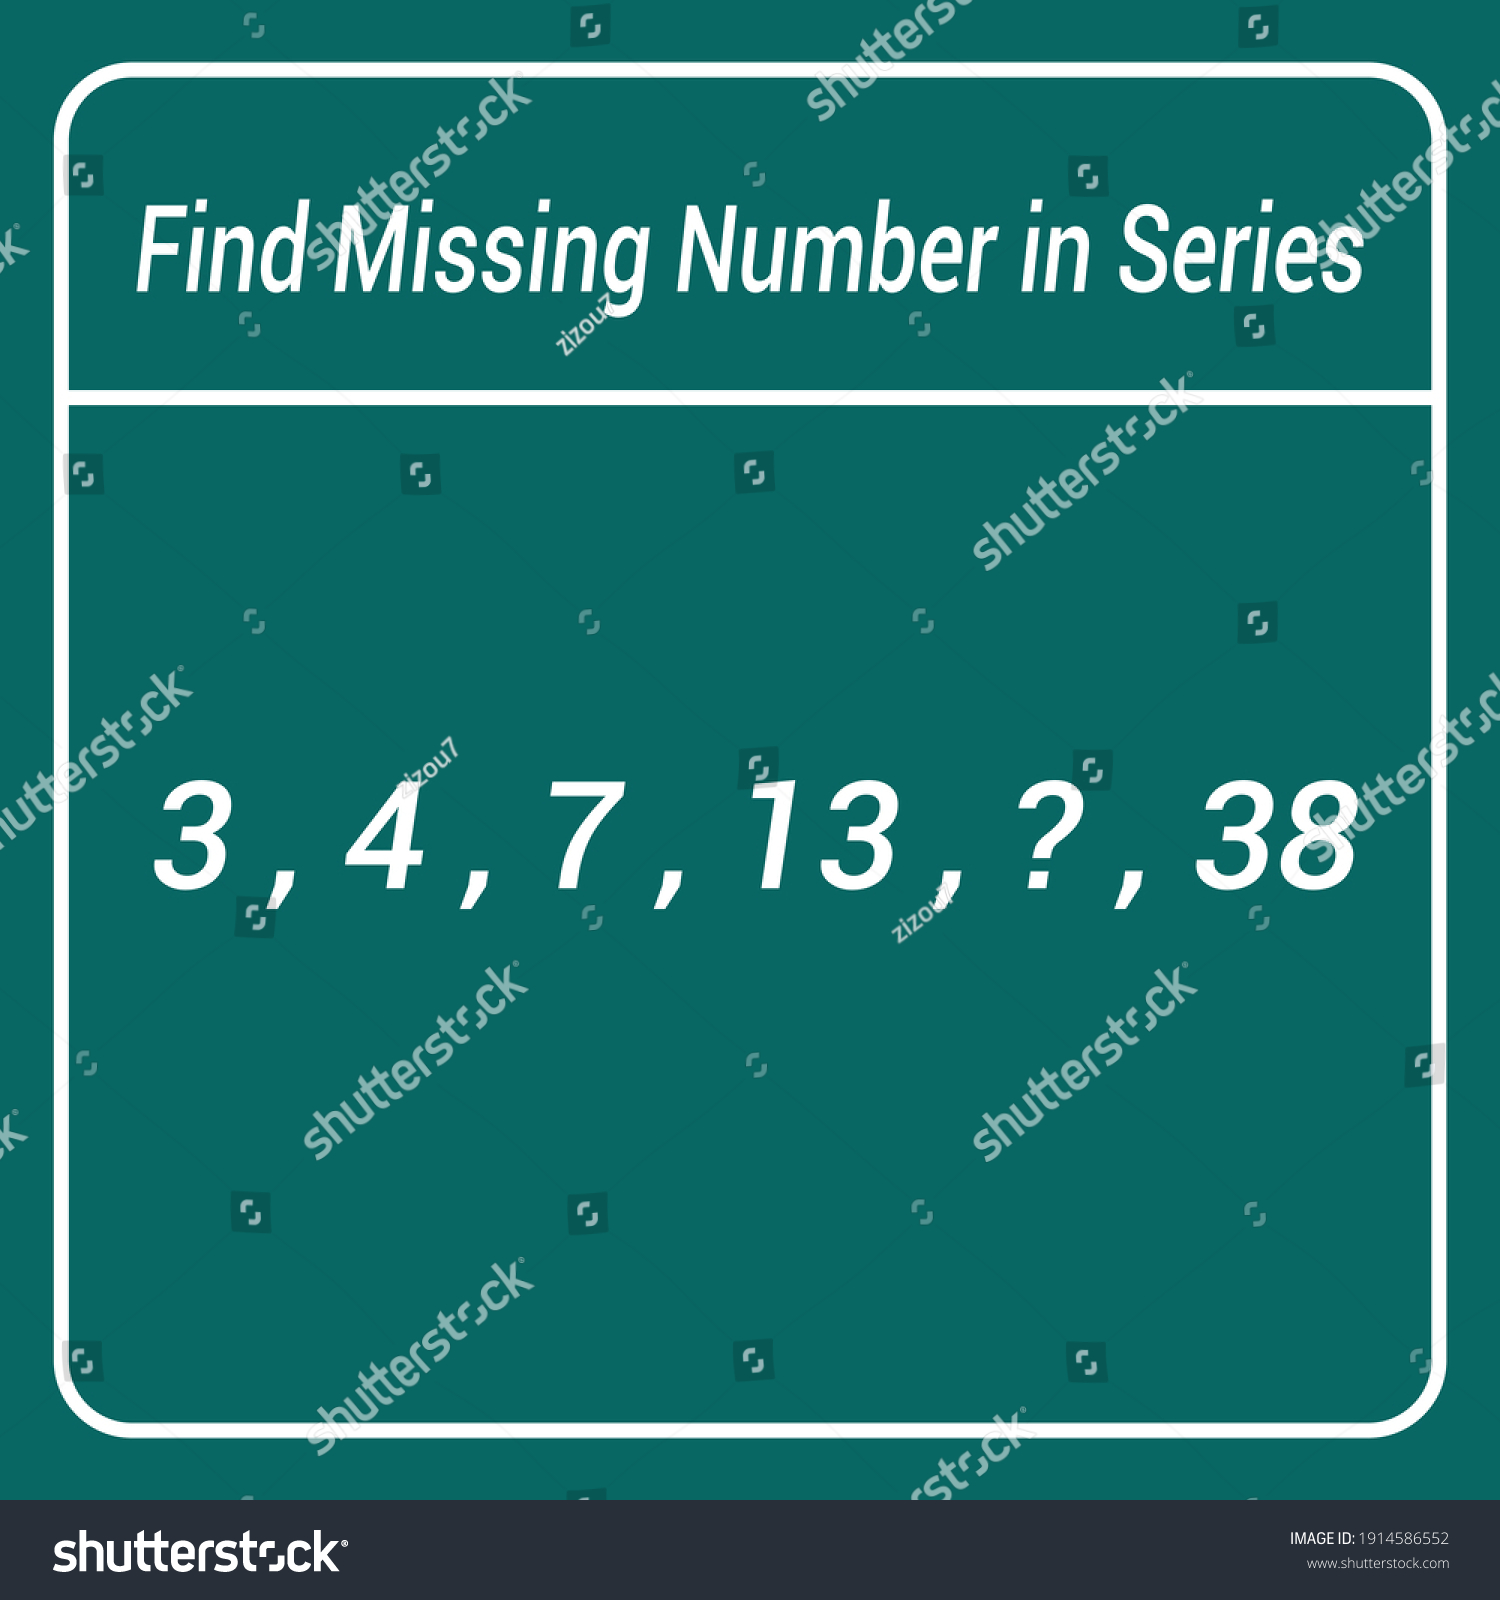 find-missing-number-in-series-mathematics-royalty-free-stock-vector